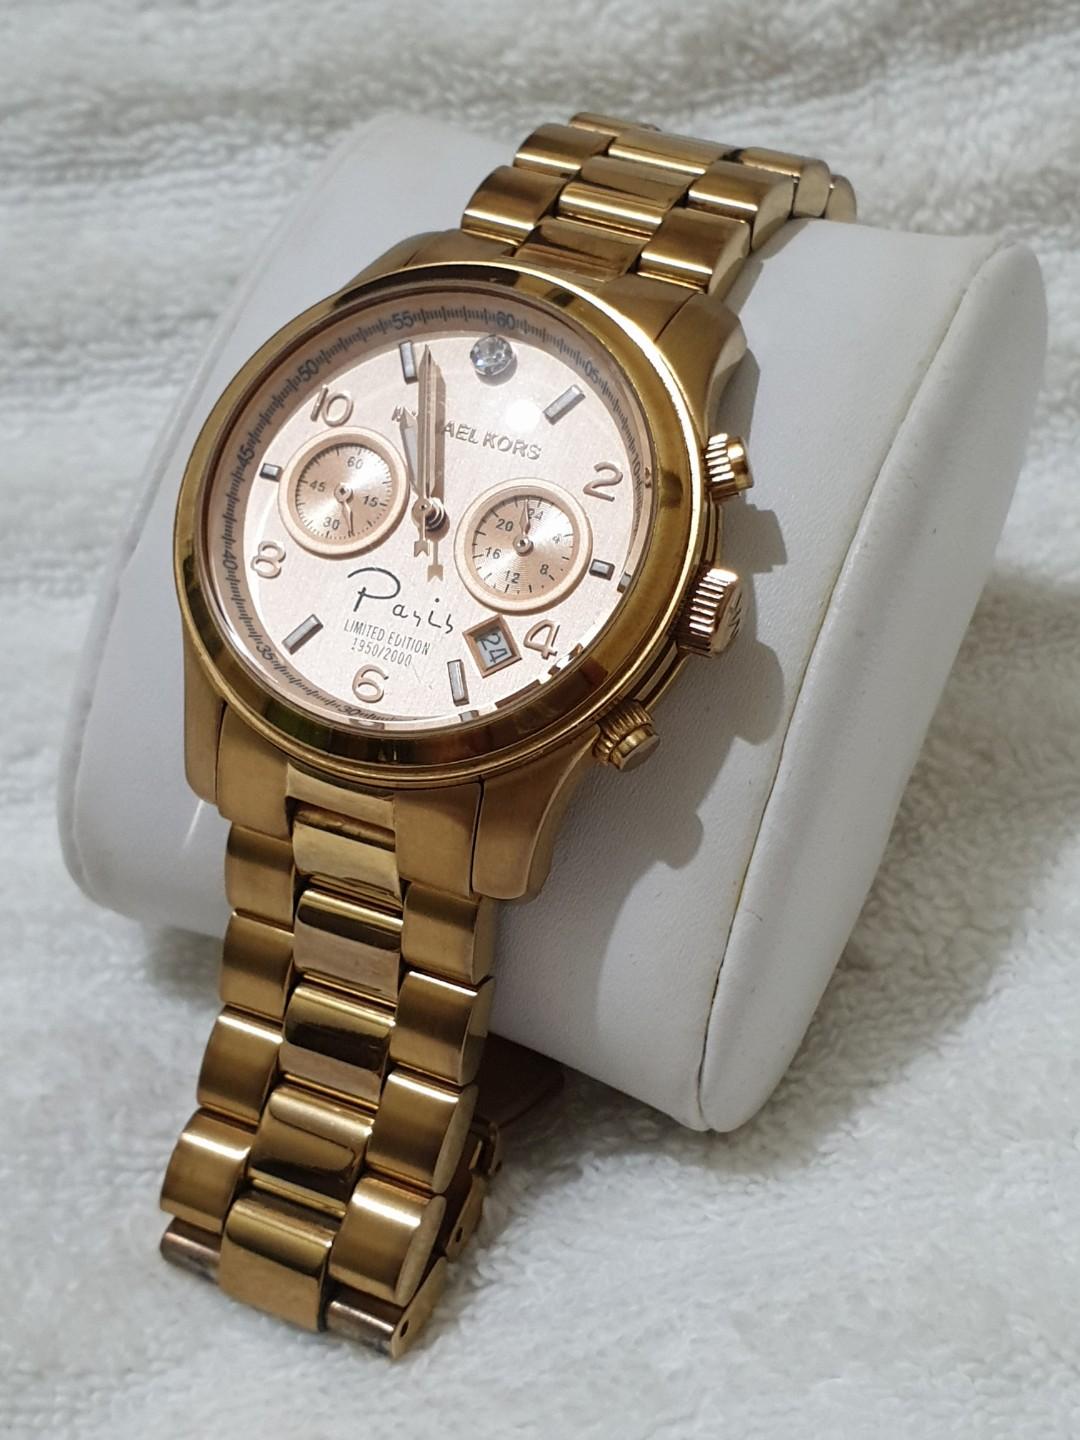 MICHAEL KORS MK5716 LADIES PARIS  NEW YORK LIMITED EDITION CHRONOGRAPH  WATCH at 320000 from Cavite  LookingFour Buy  Sell Online